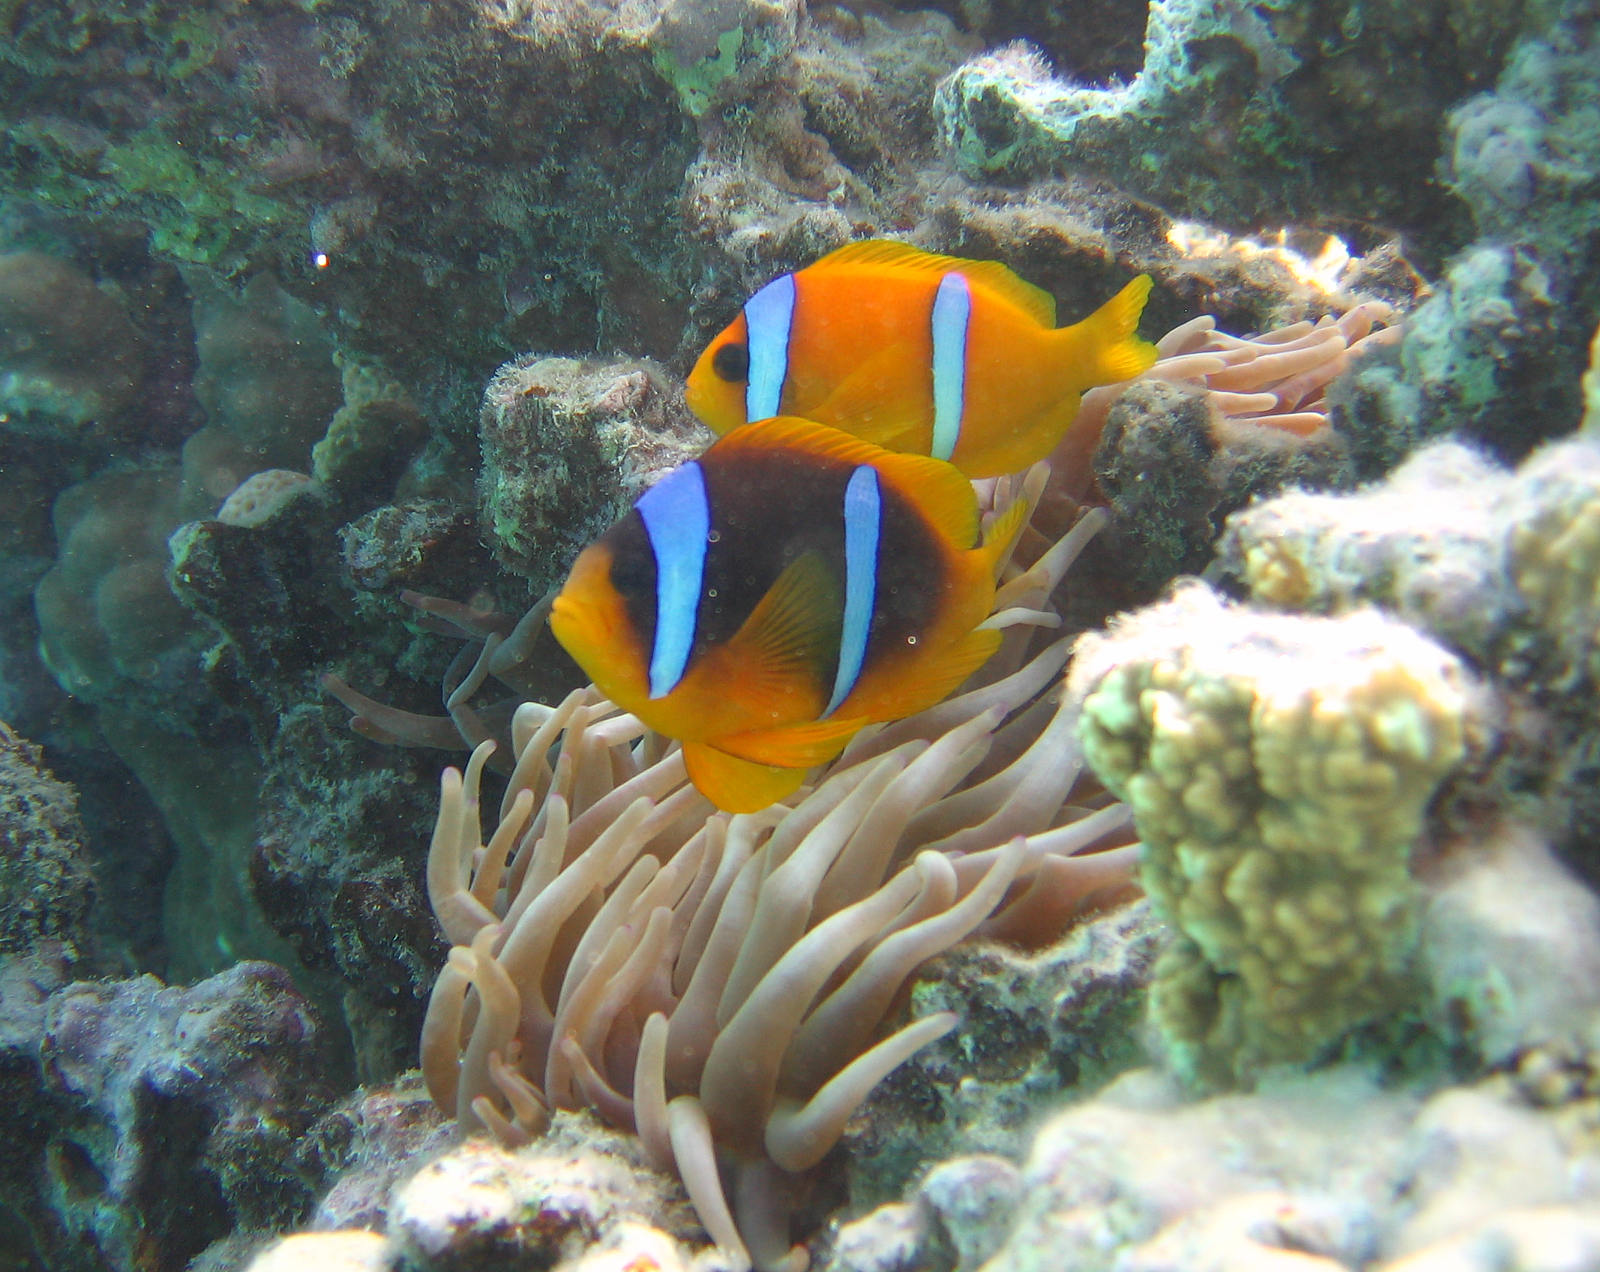 Amphiprion bicinctus in the wild; image by O. Tsyganov